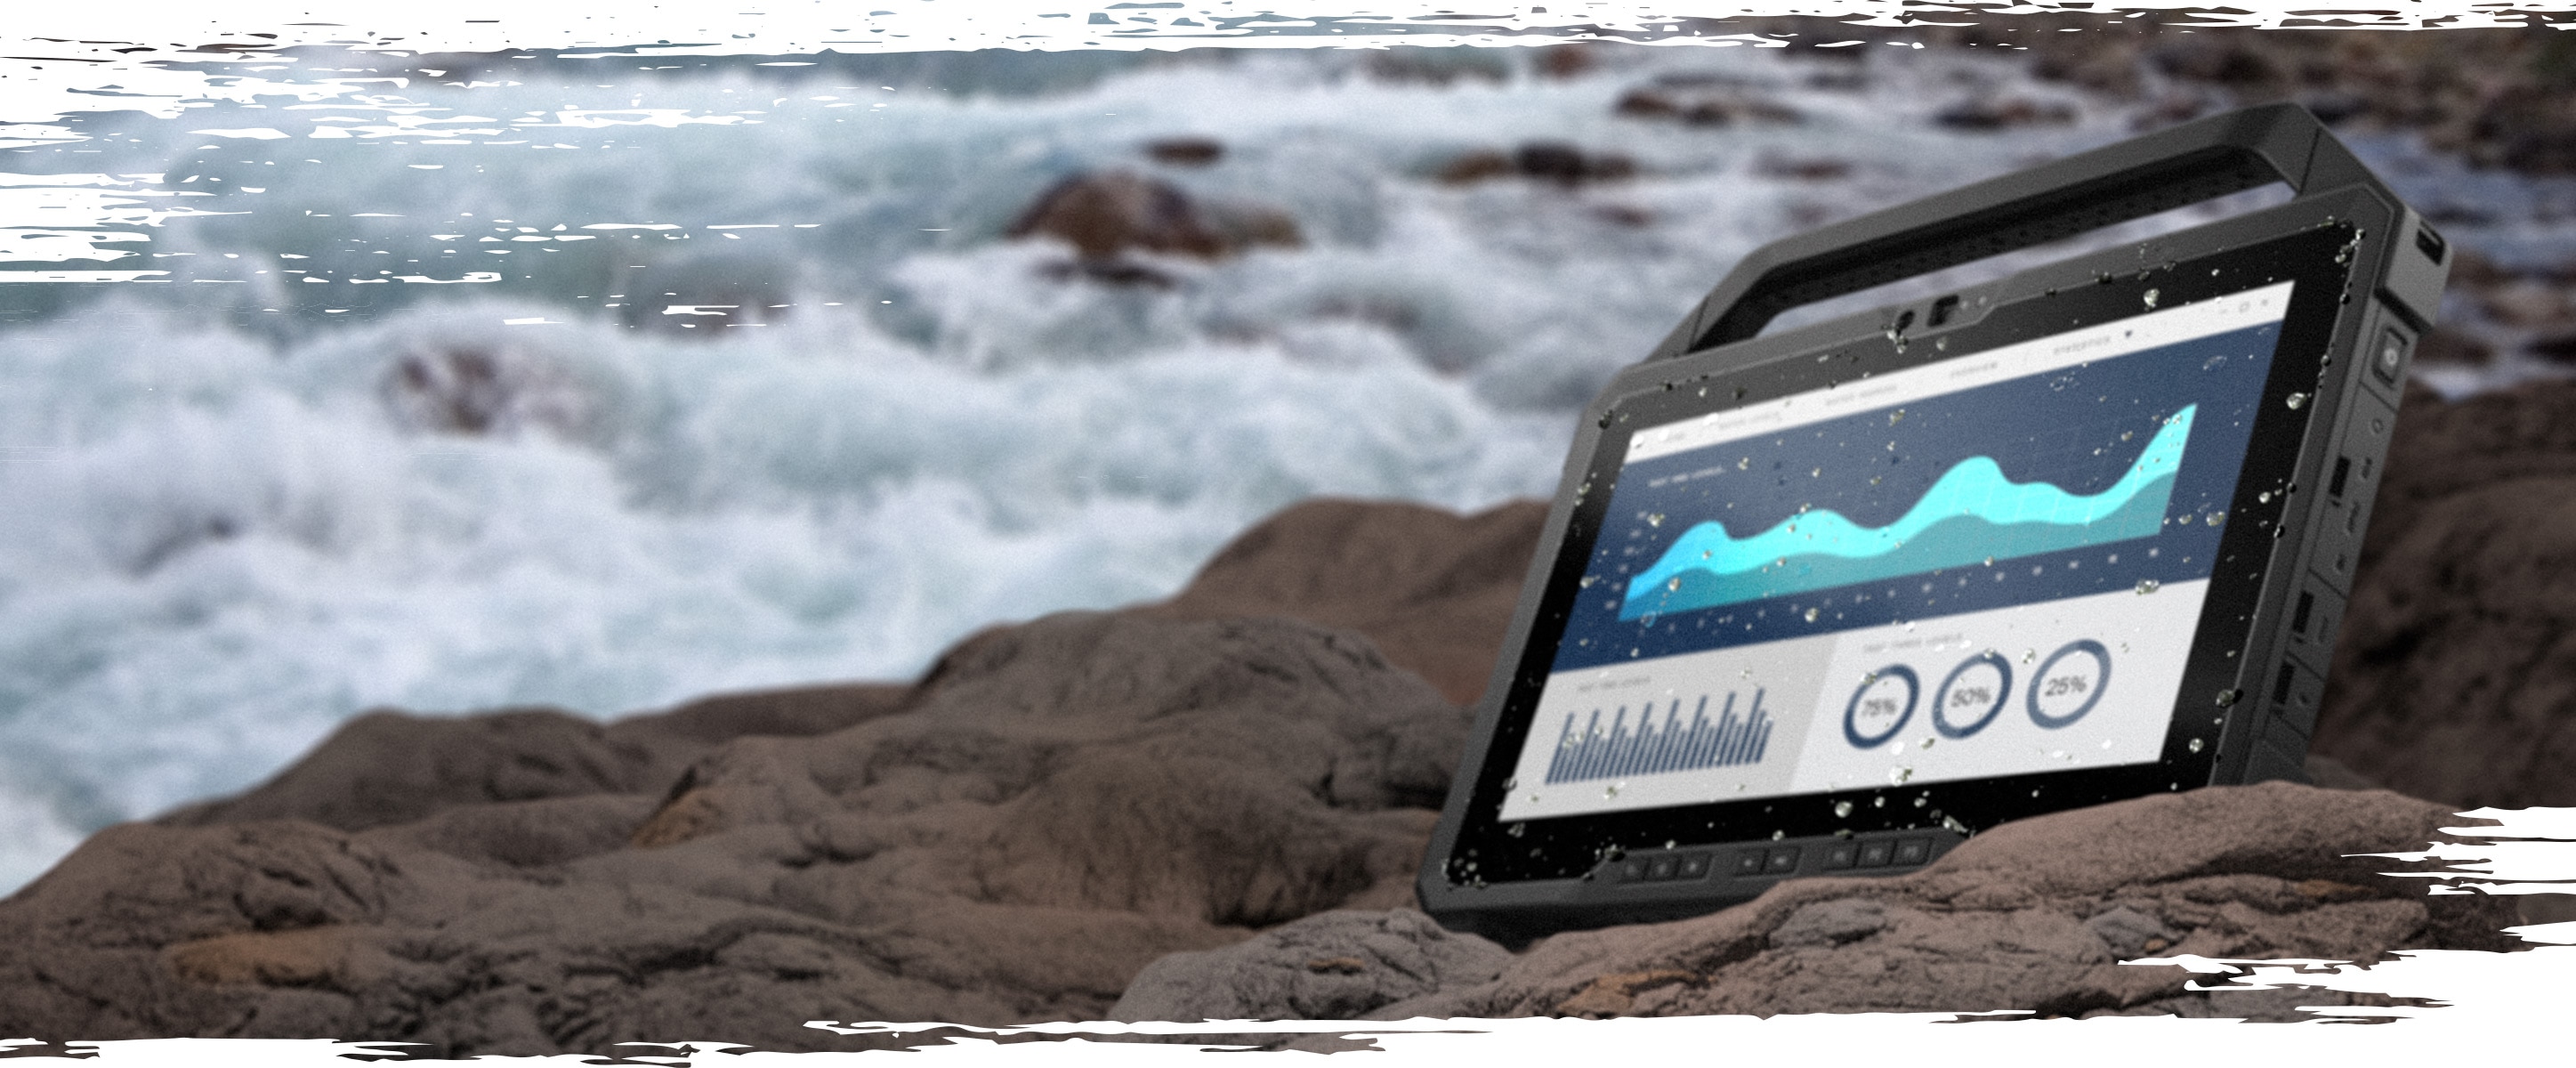 New Latitude 12 7220 Rugged Extreme Tablet | Dell Middle East